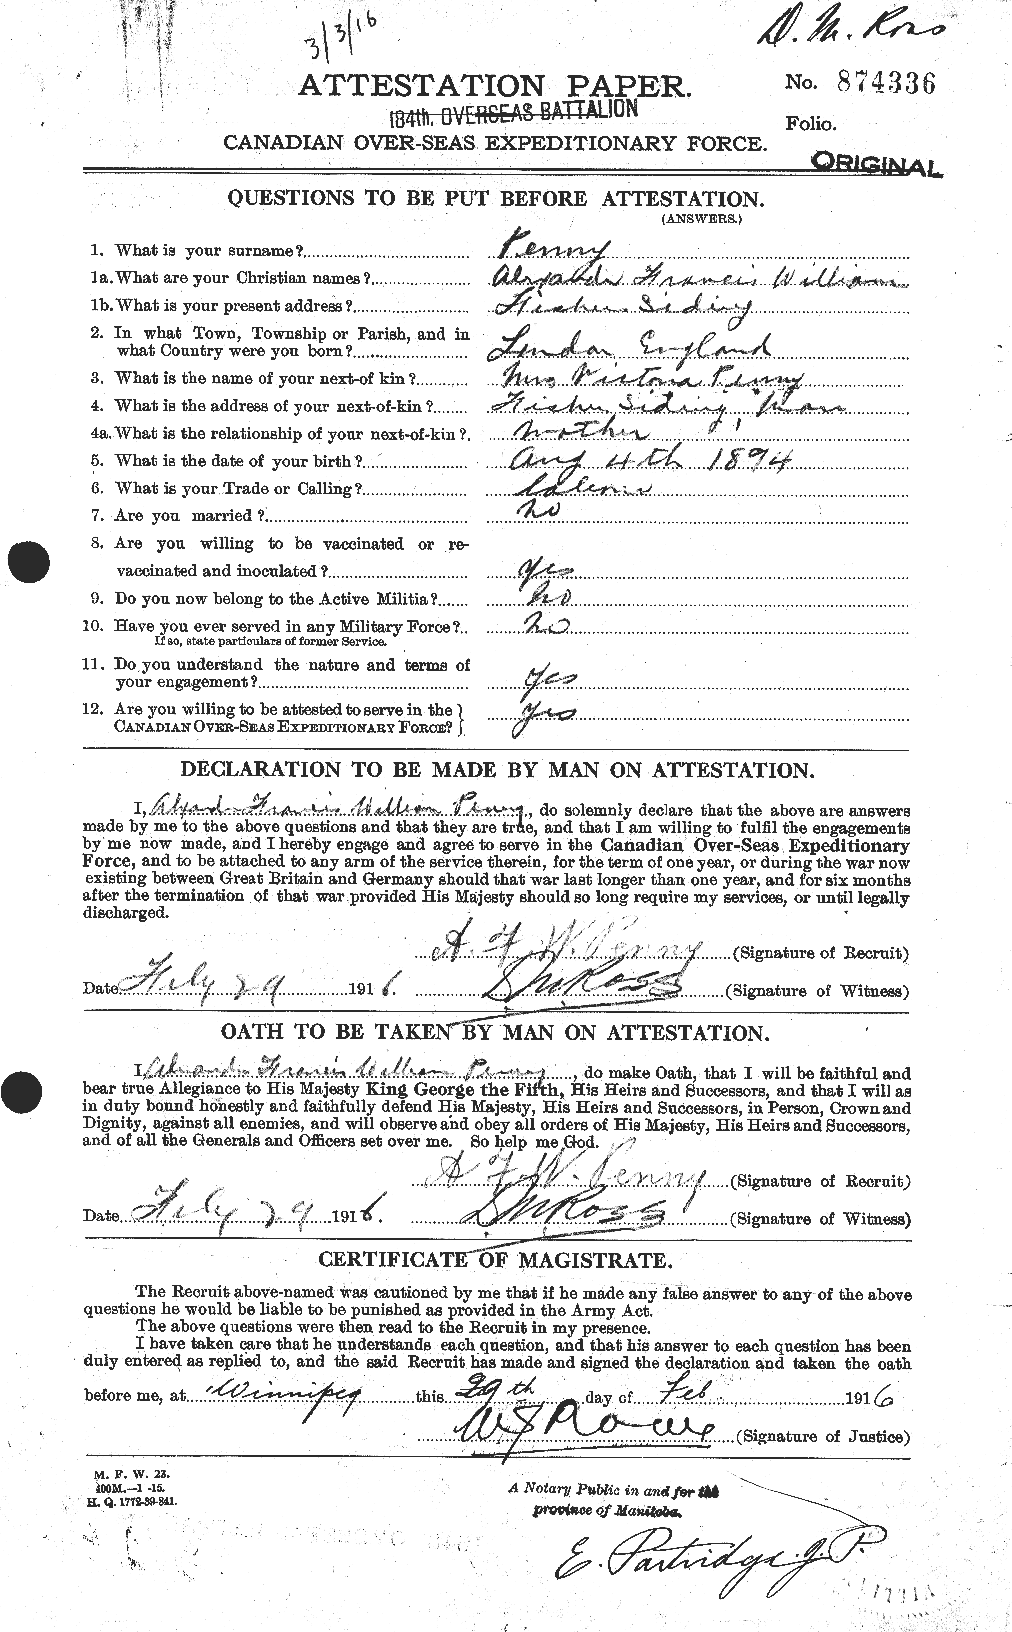 Personnel Records of the First World War - CEF 573293a